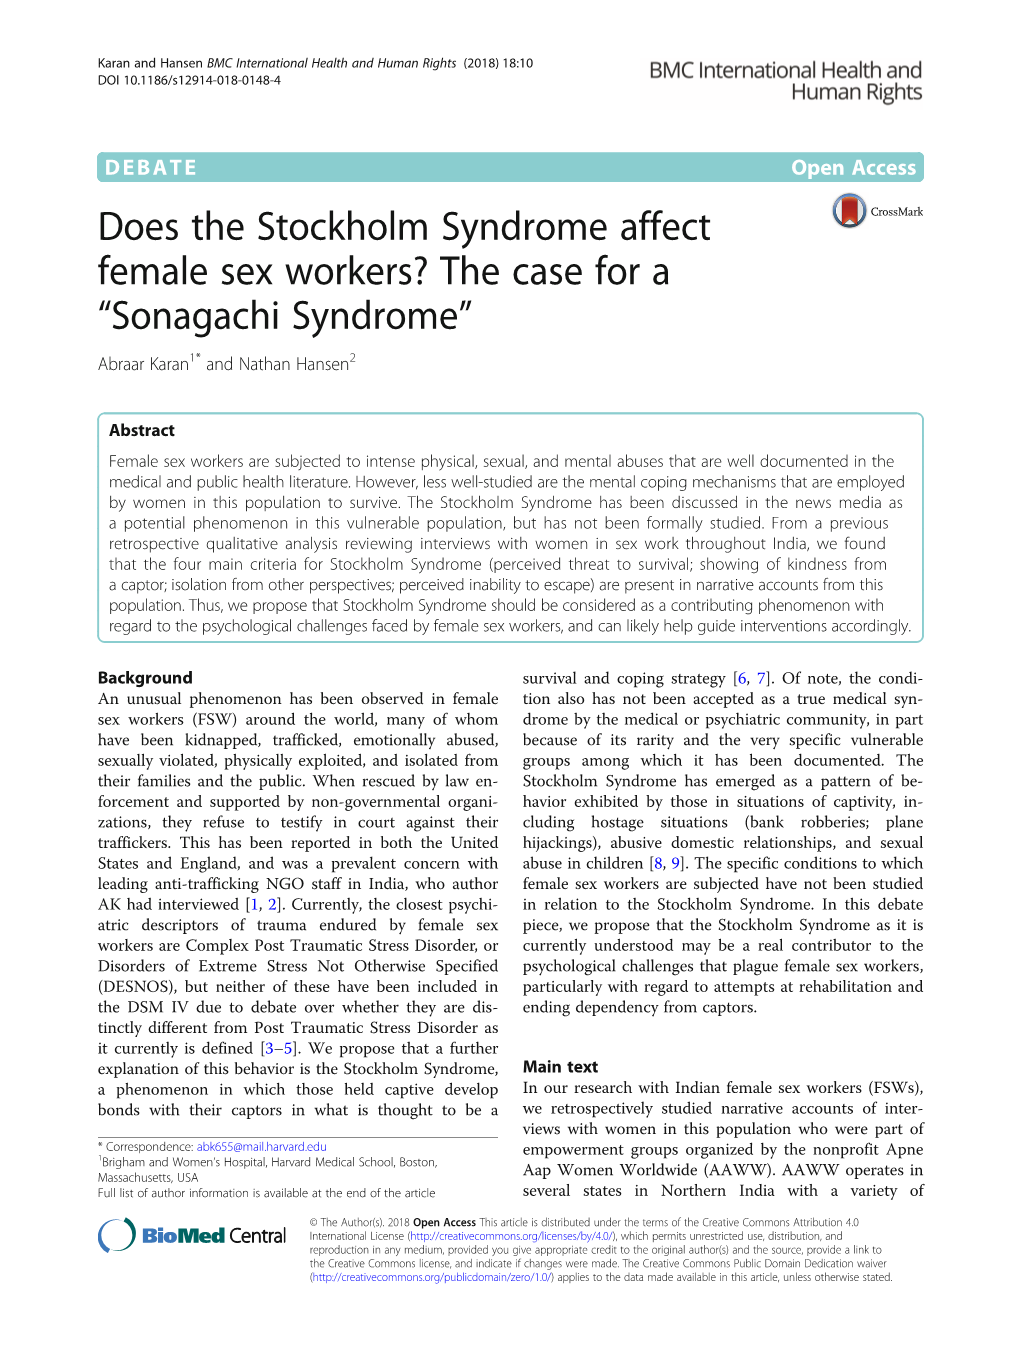 Does the Stockholm Syndrome Affect Female Sex Workers? the Case for a “Sonagachi Syndrome” Abraar Karan1* and Nathan Hansen2